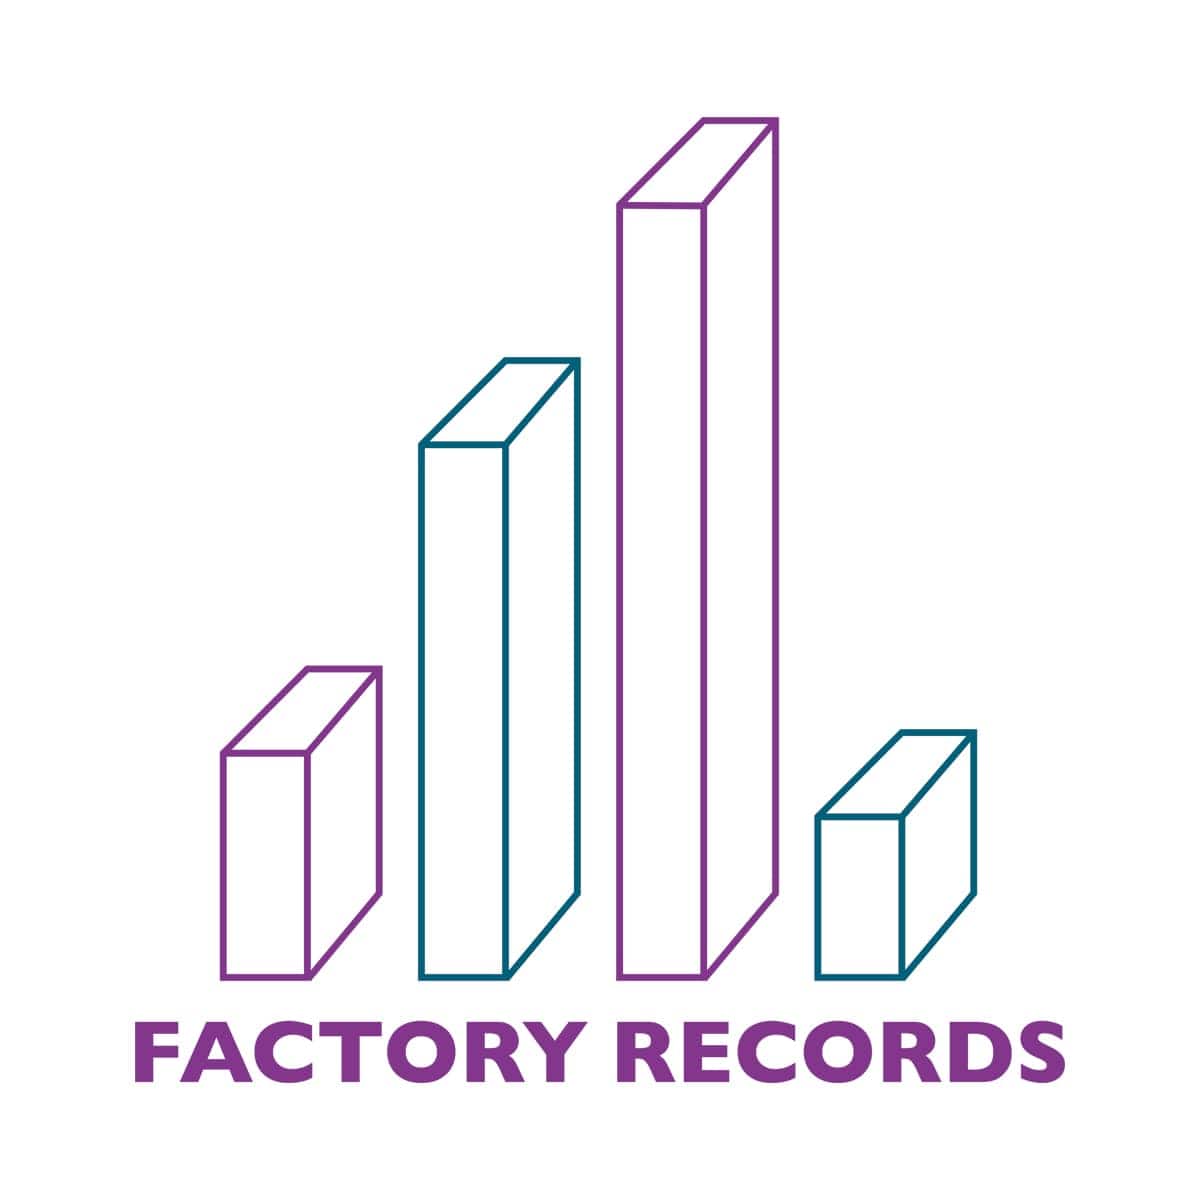 Paul Smith x Factory Records